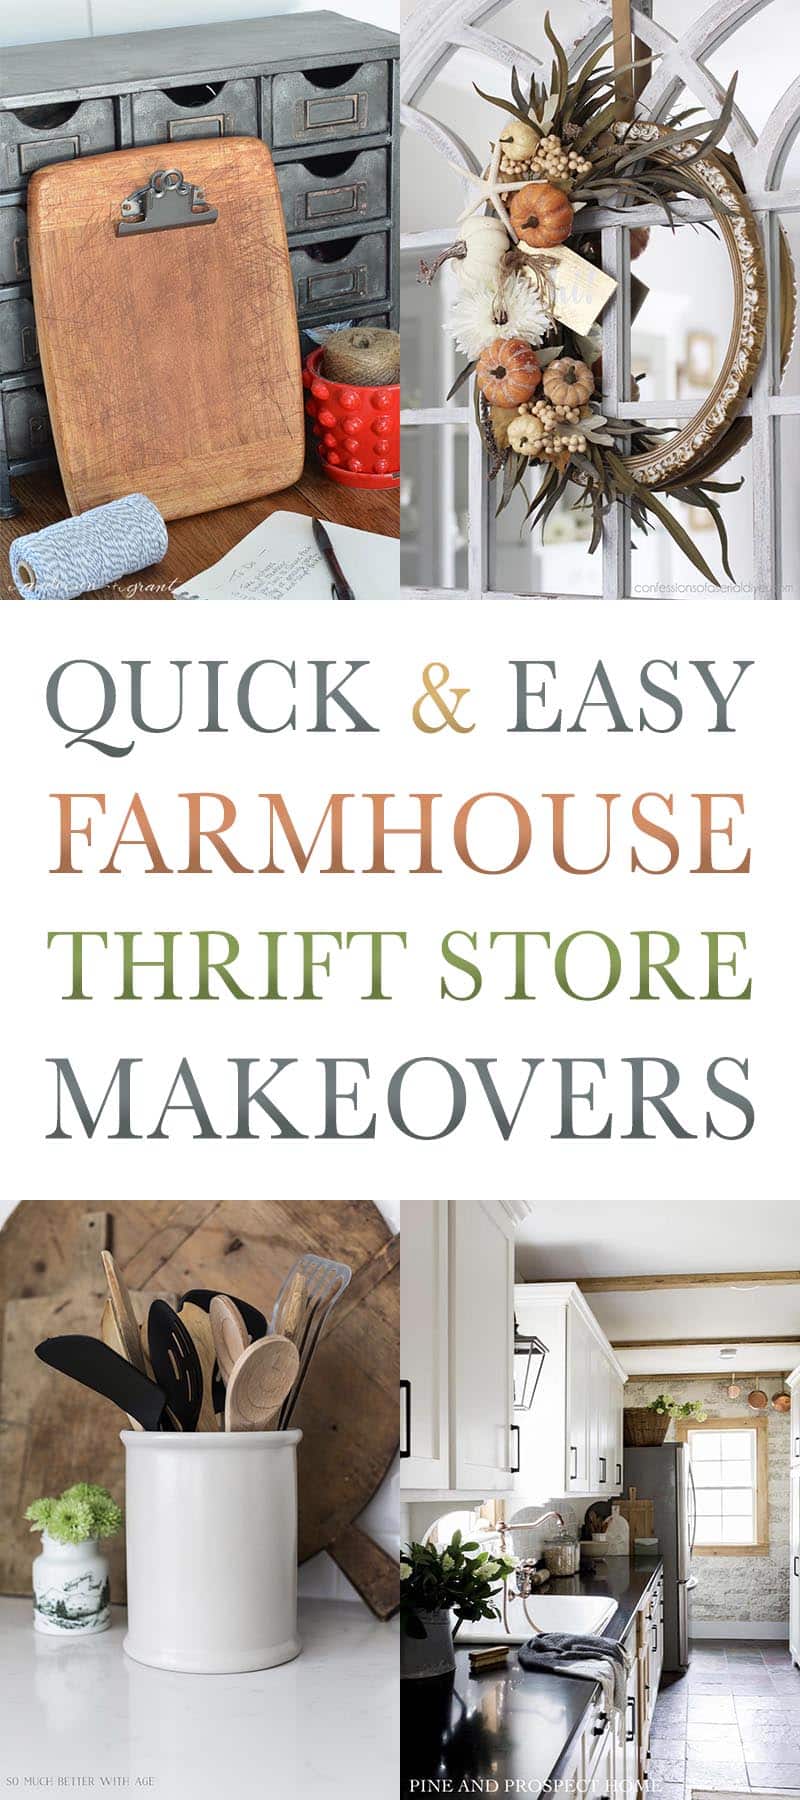 Transform your space with 10 quick and budget-friendly Farmhouse Thrift Store Makeovers! Discover easy DIY projects for rustic charm.

